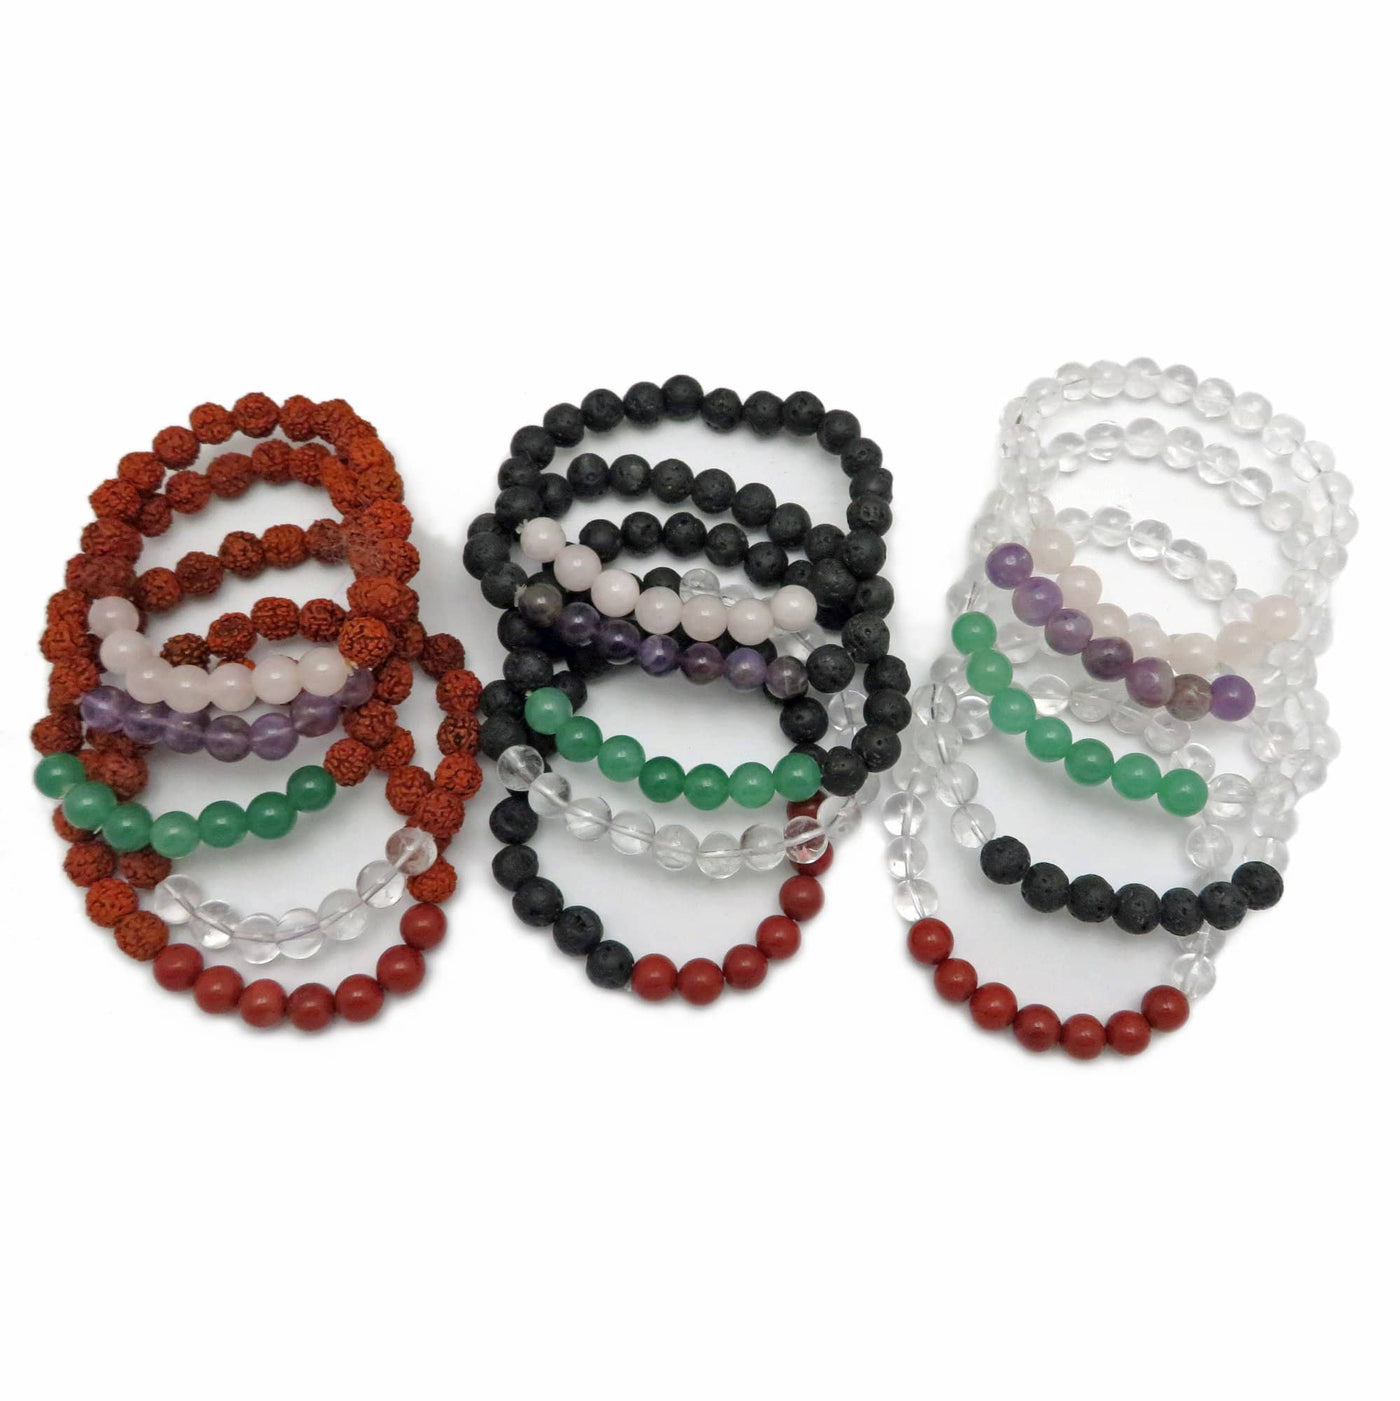 varied healing stone bracelets placed next to each other on a white background